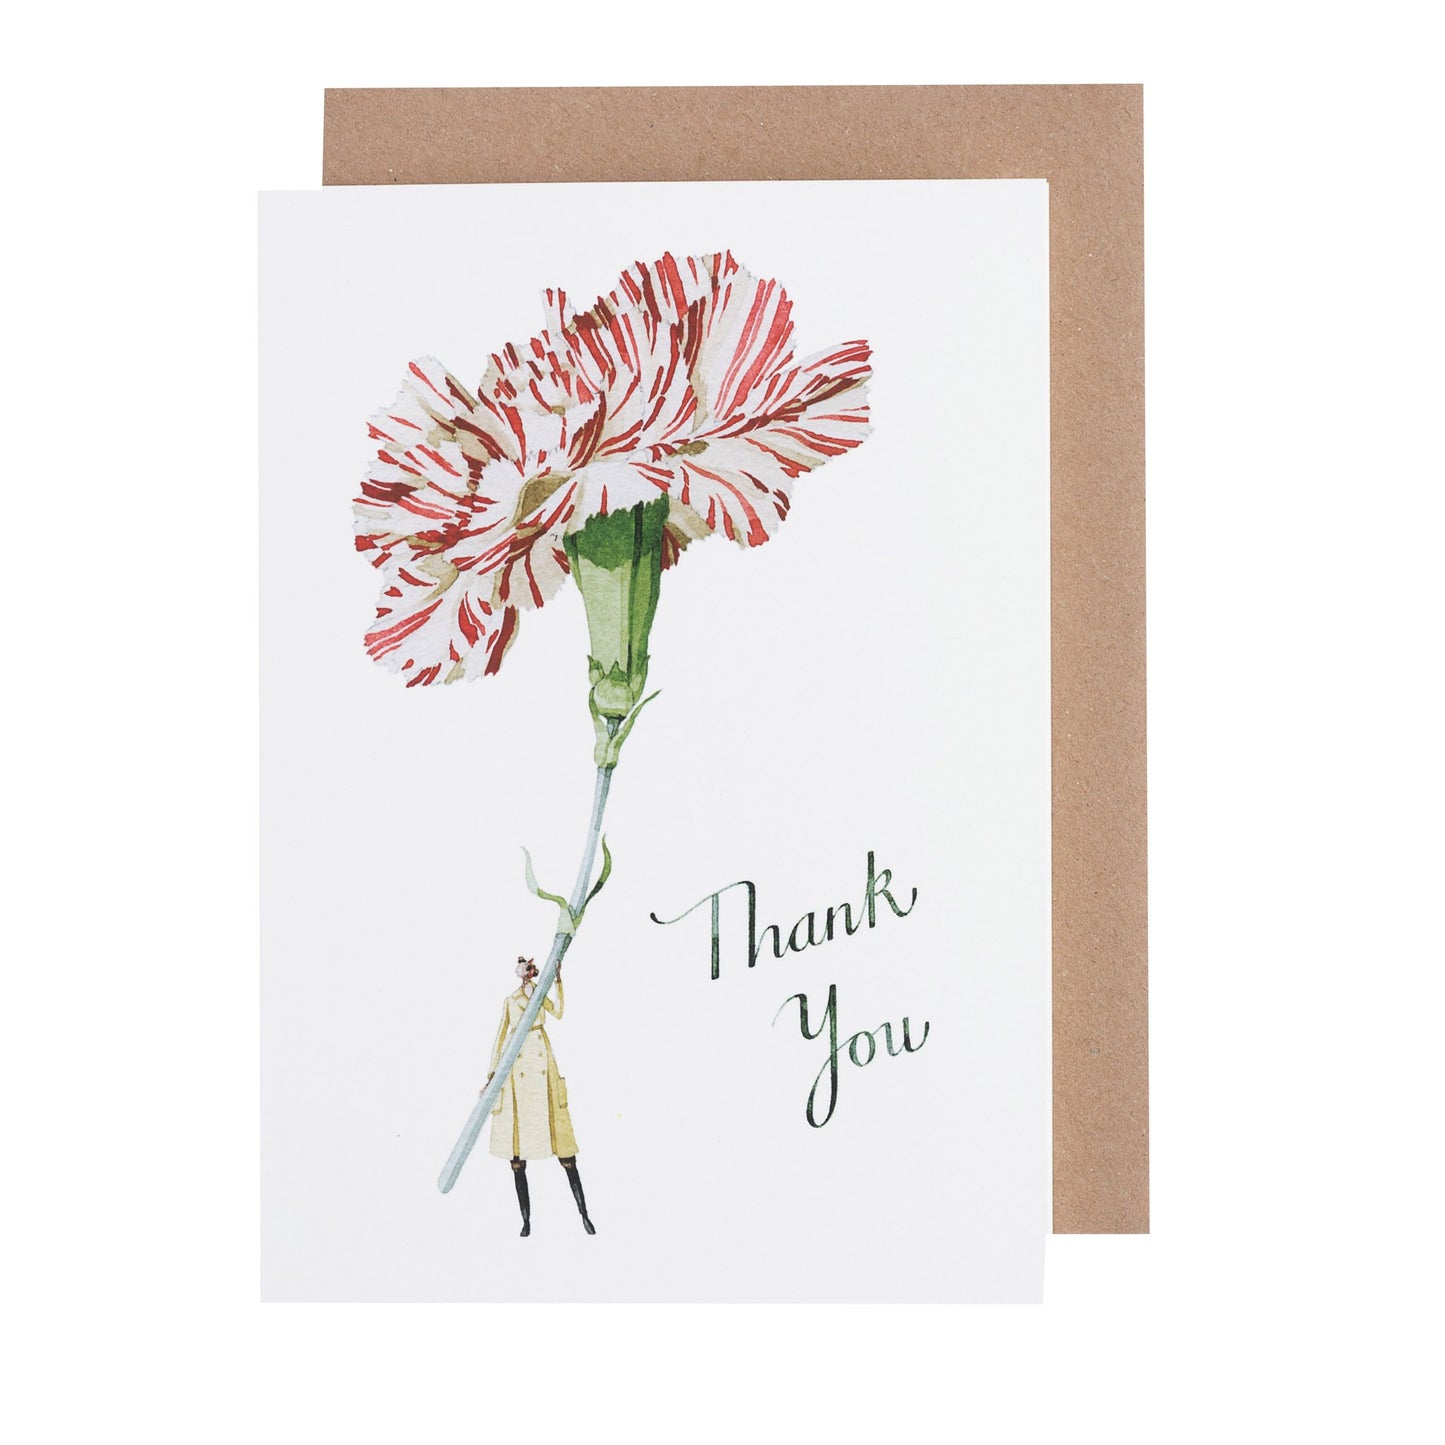 environmentally sustainable paper, compostable packaging, recycled paper, made in england, illustration, thank you, carnation